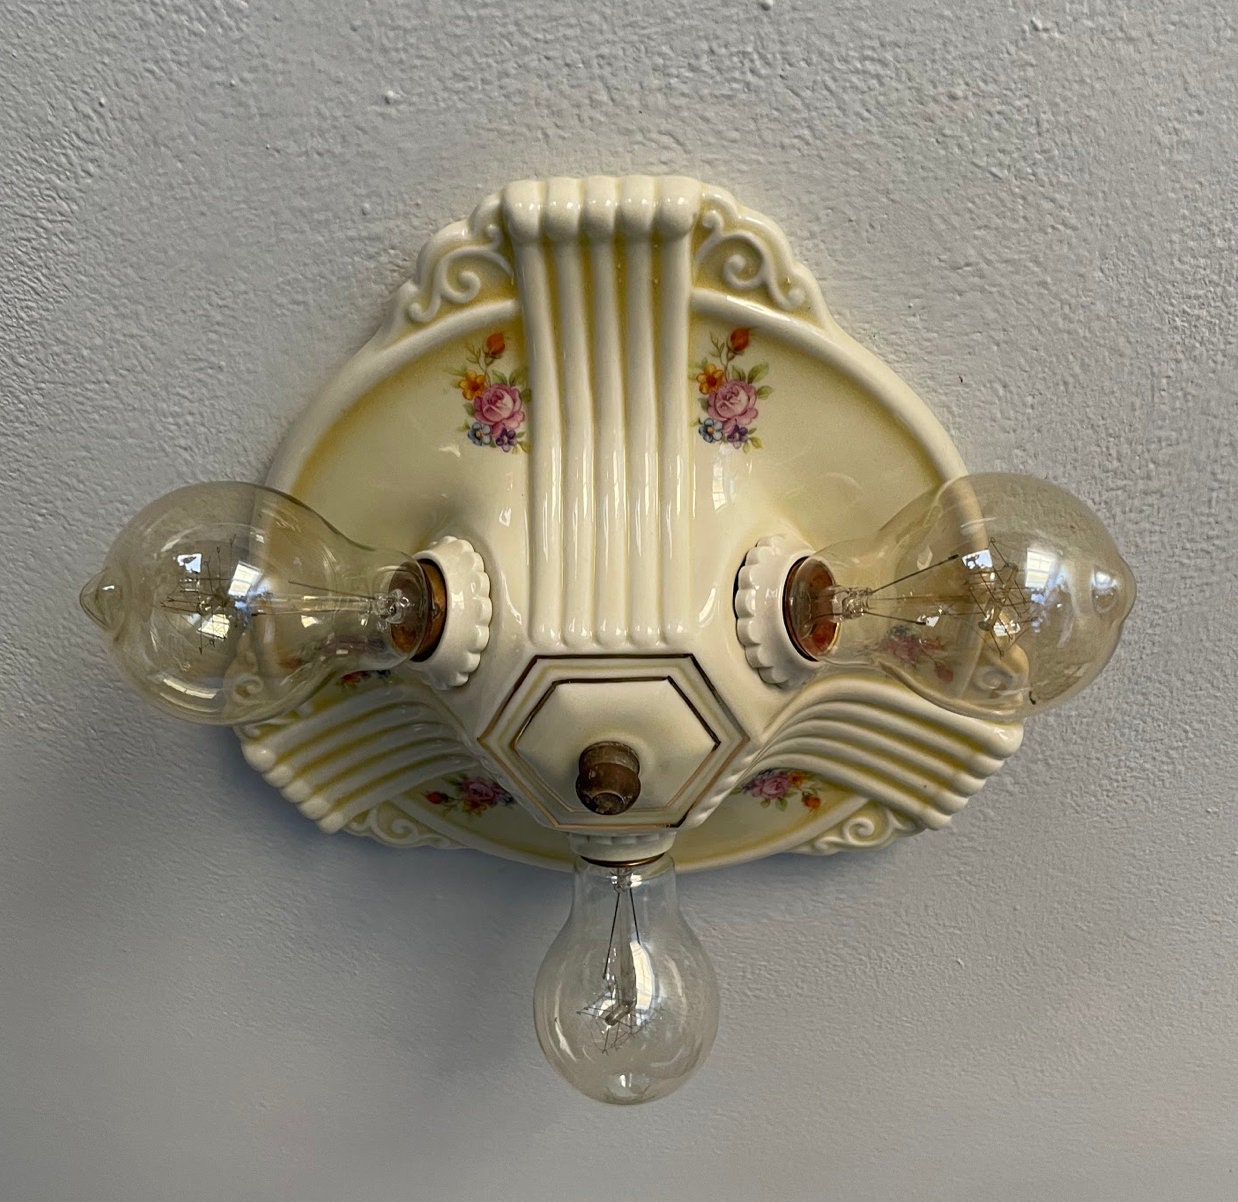 Vintage Lighting 1910 pull chain ceiling fixture. Roses! Rewired!